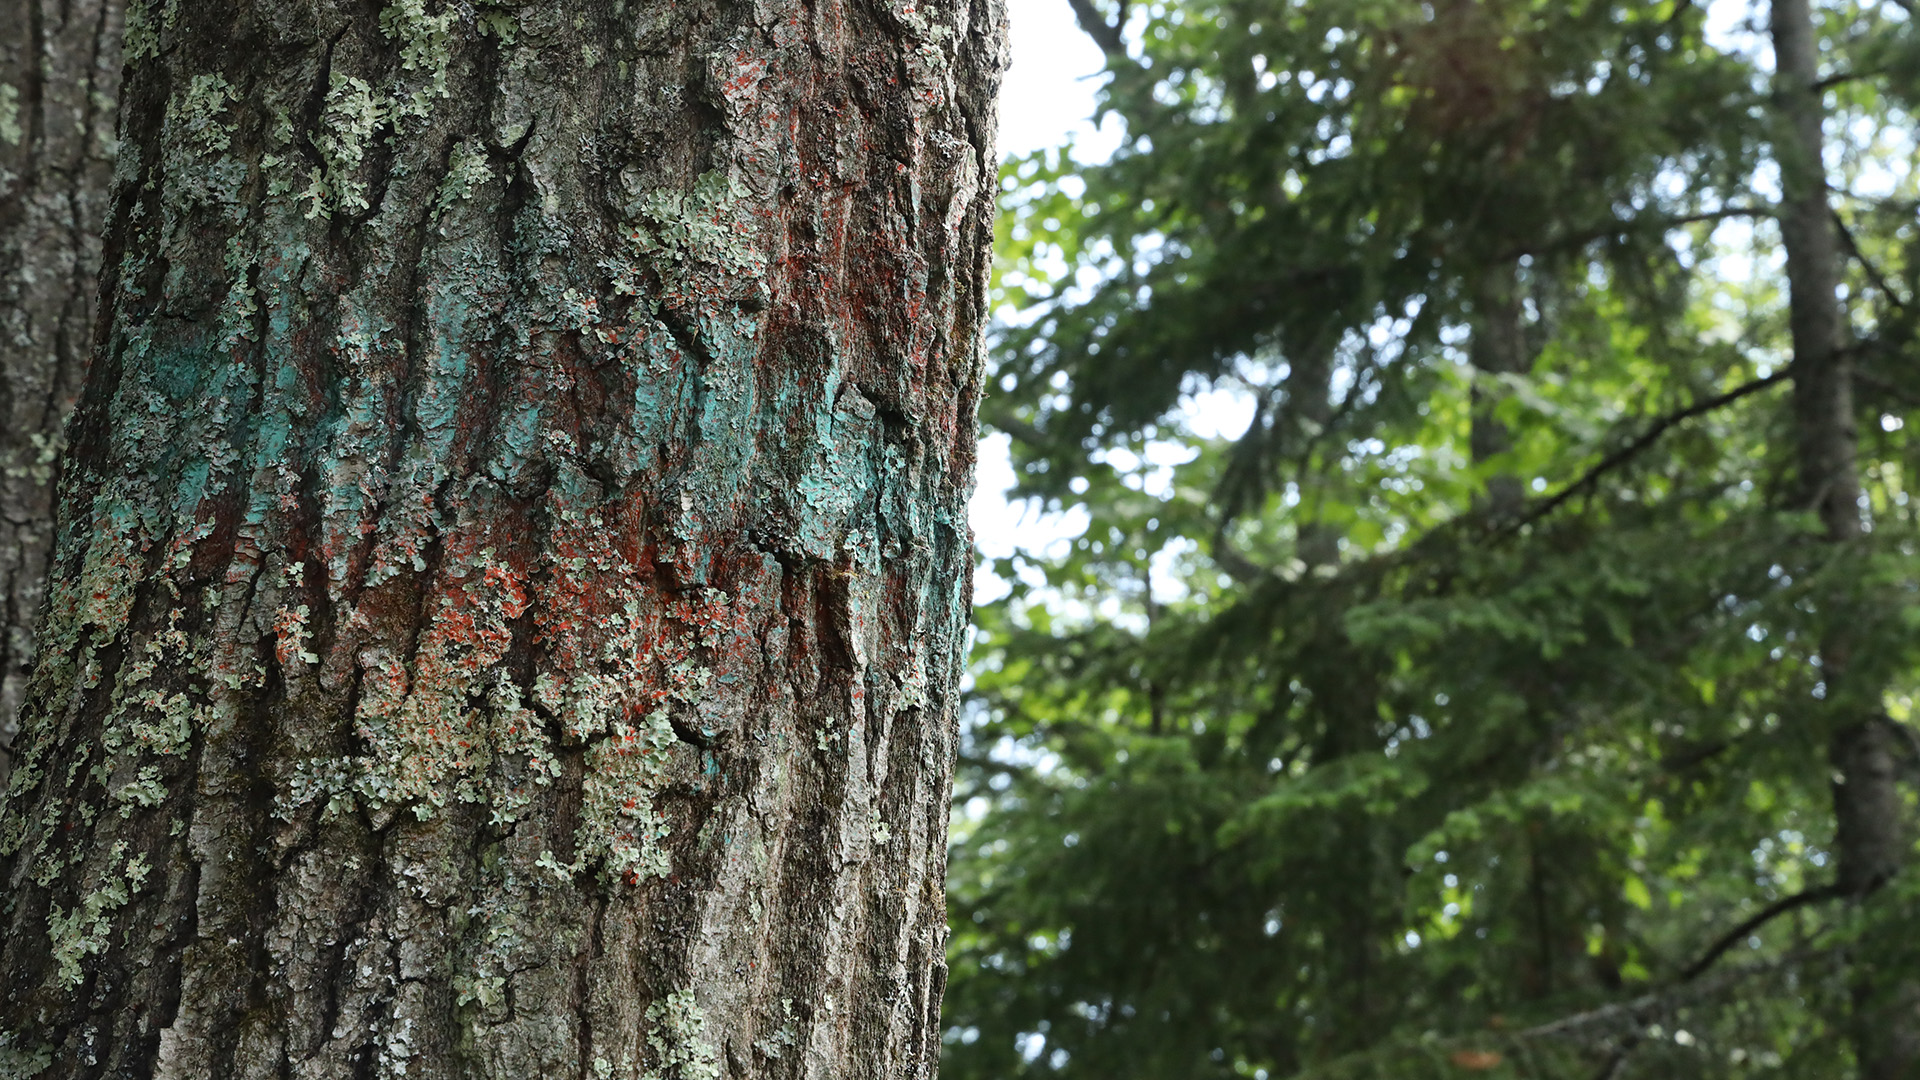 Faint green and orange paint markings cross the uneven bark of a tree trunk, with other trees in the background.